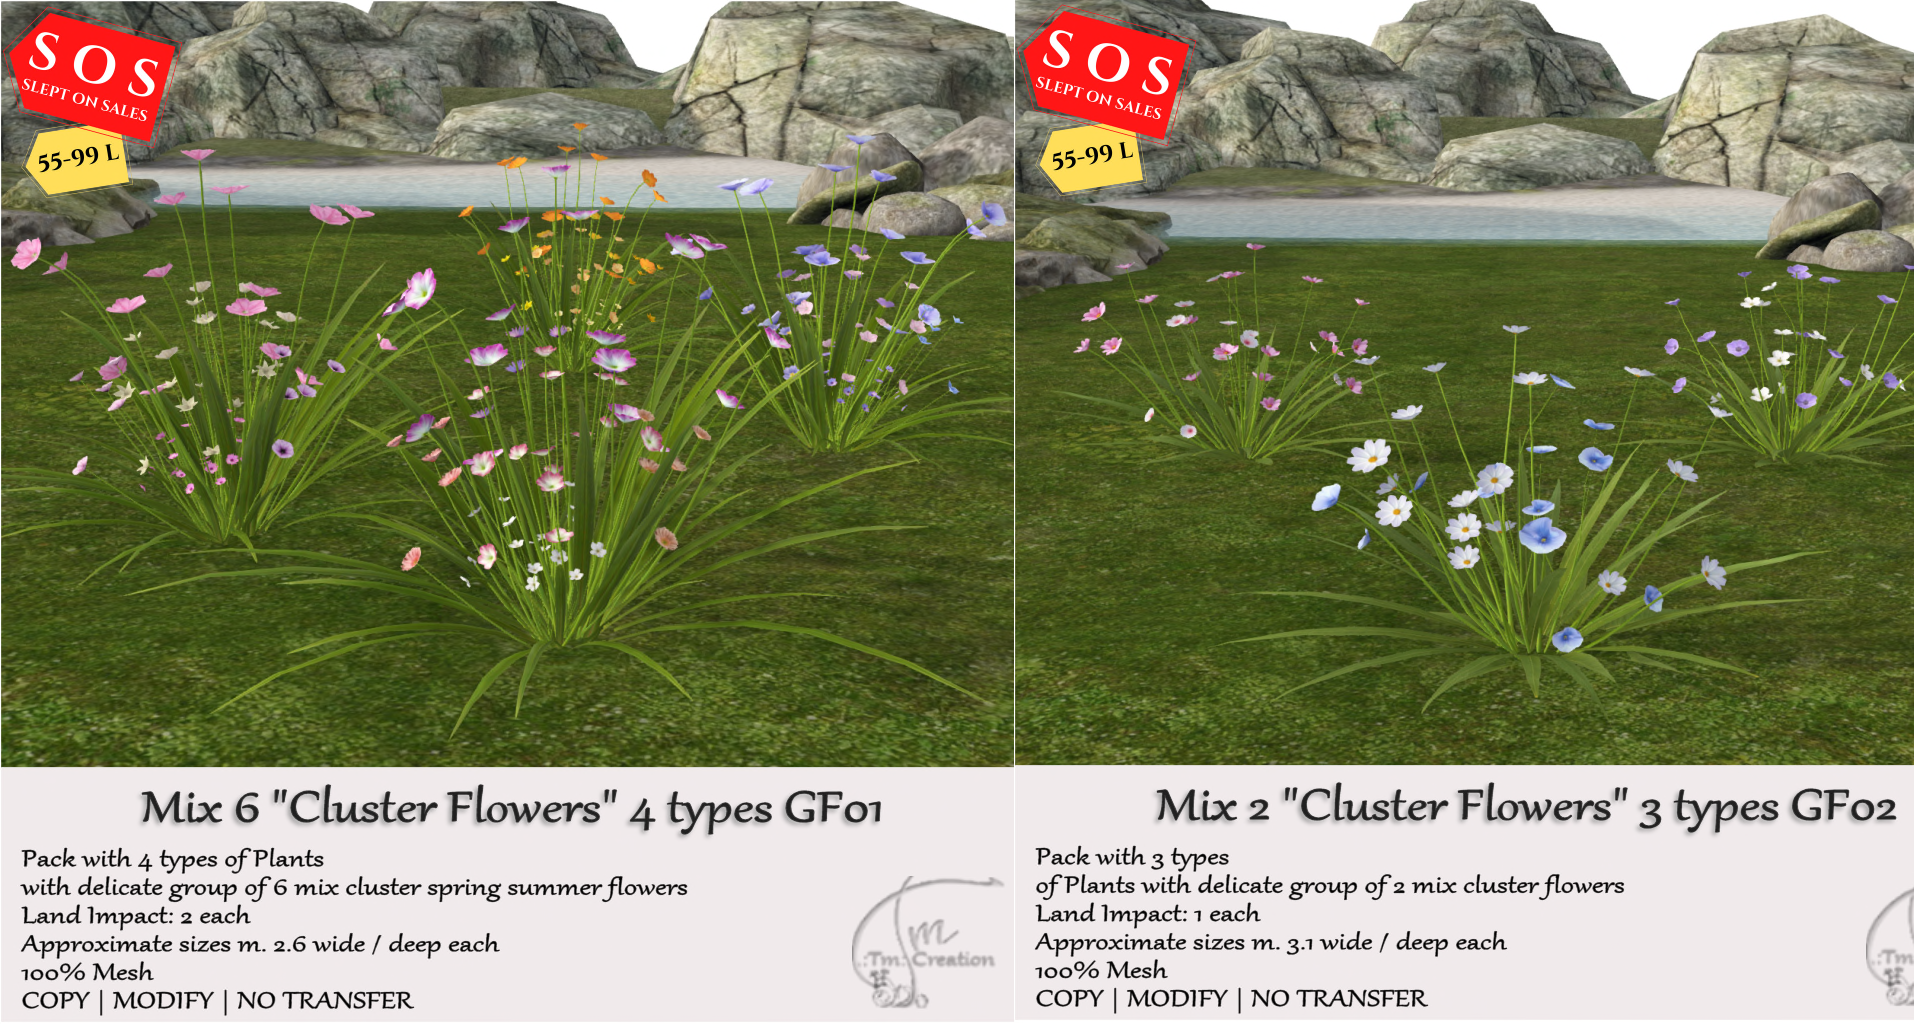 TM Creation – Cluster Mix6 Flowers & Cluster Mix2 Flowers